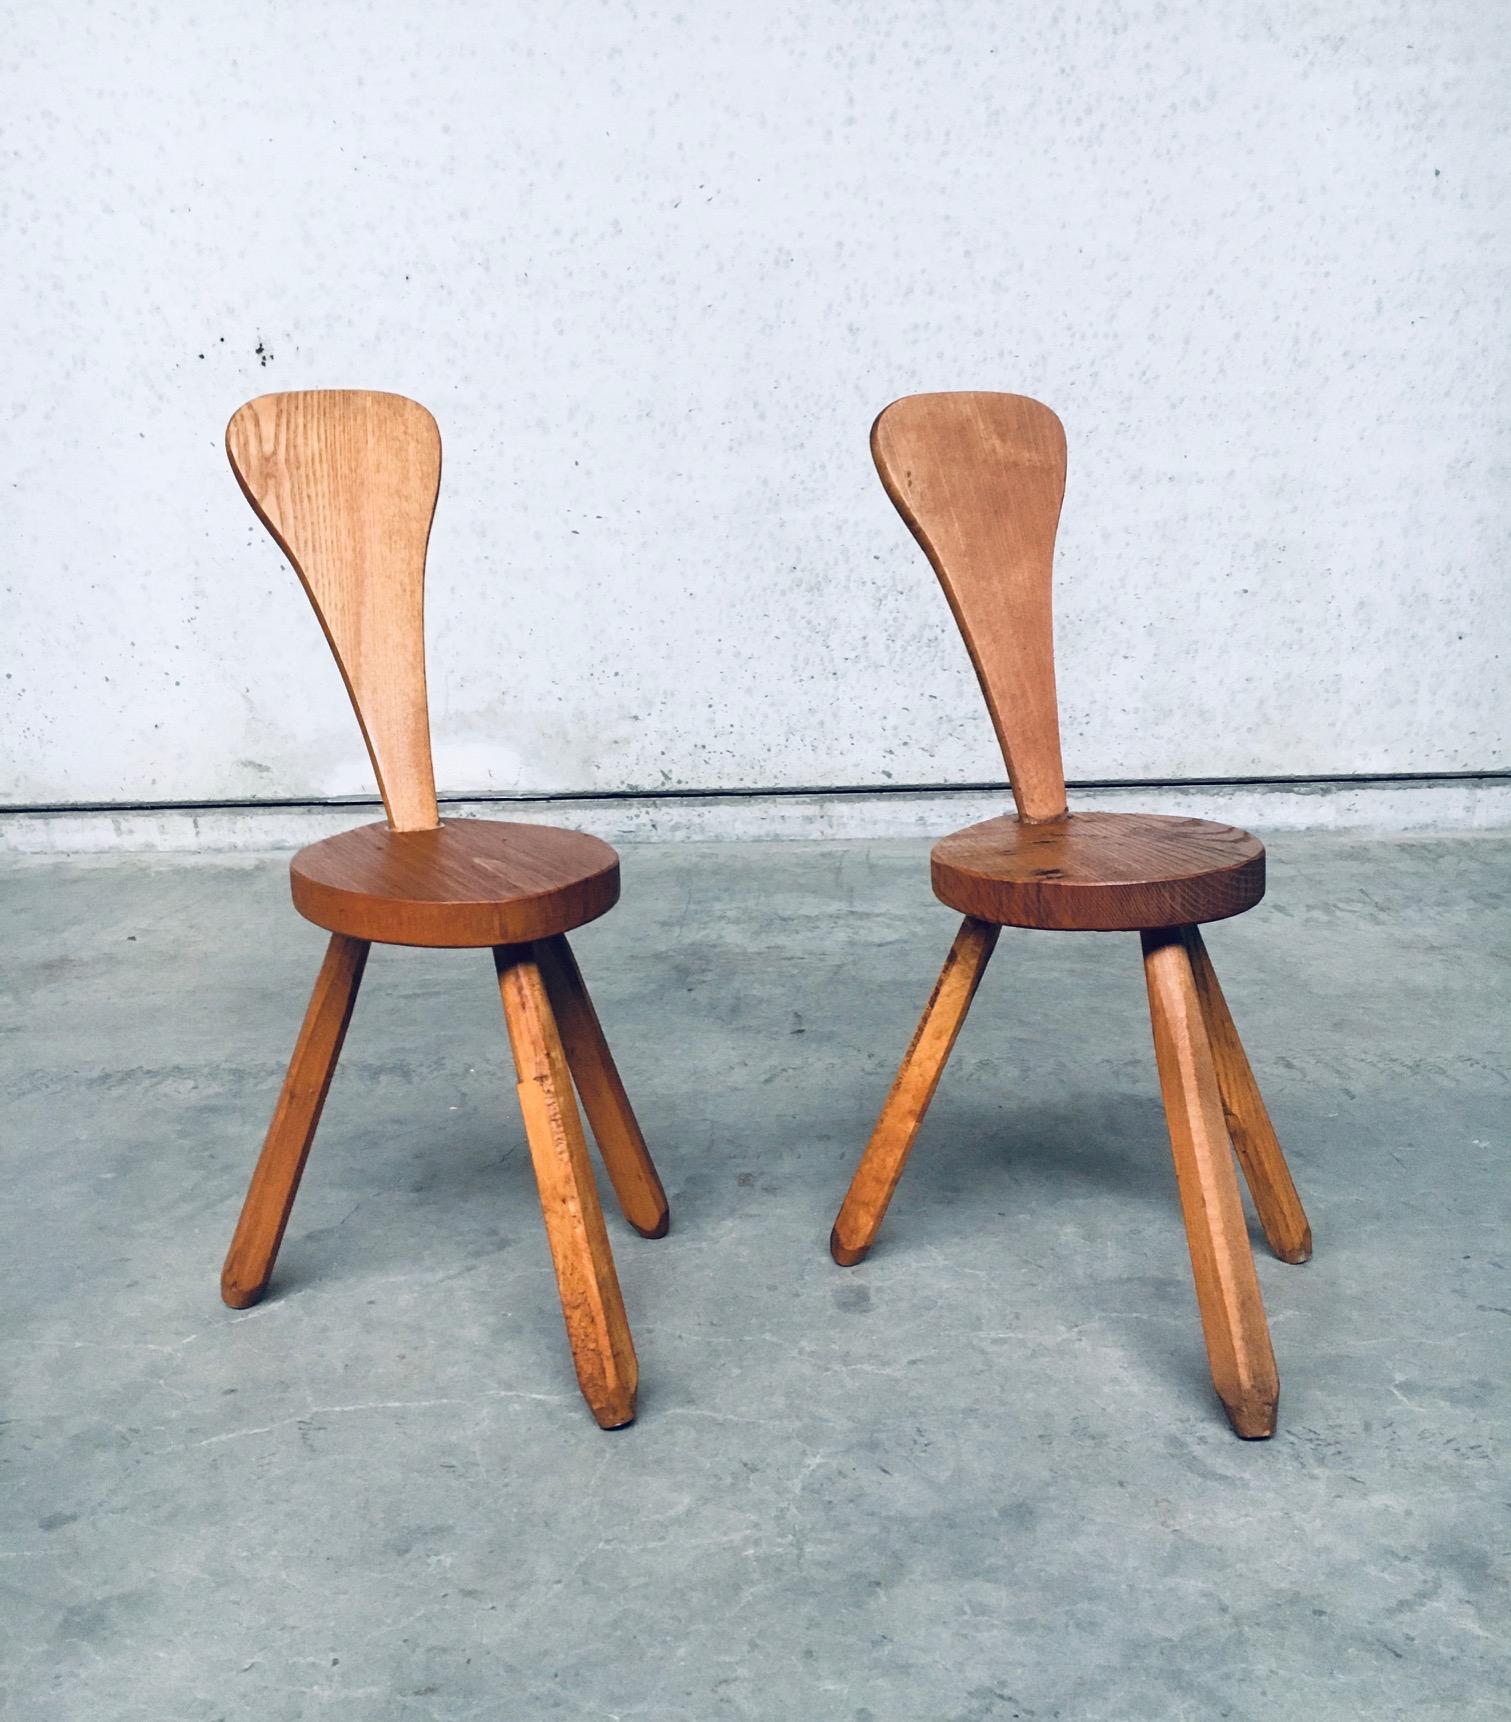 Vintage Rustic handcrafted Brutalist in style oak milk stool set. Made in Belgium, 1950's / 60's. Solid oak wood constructed stools. Both are in very good, original condition. The back rest has been reglued at some point in time by the previous